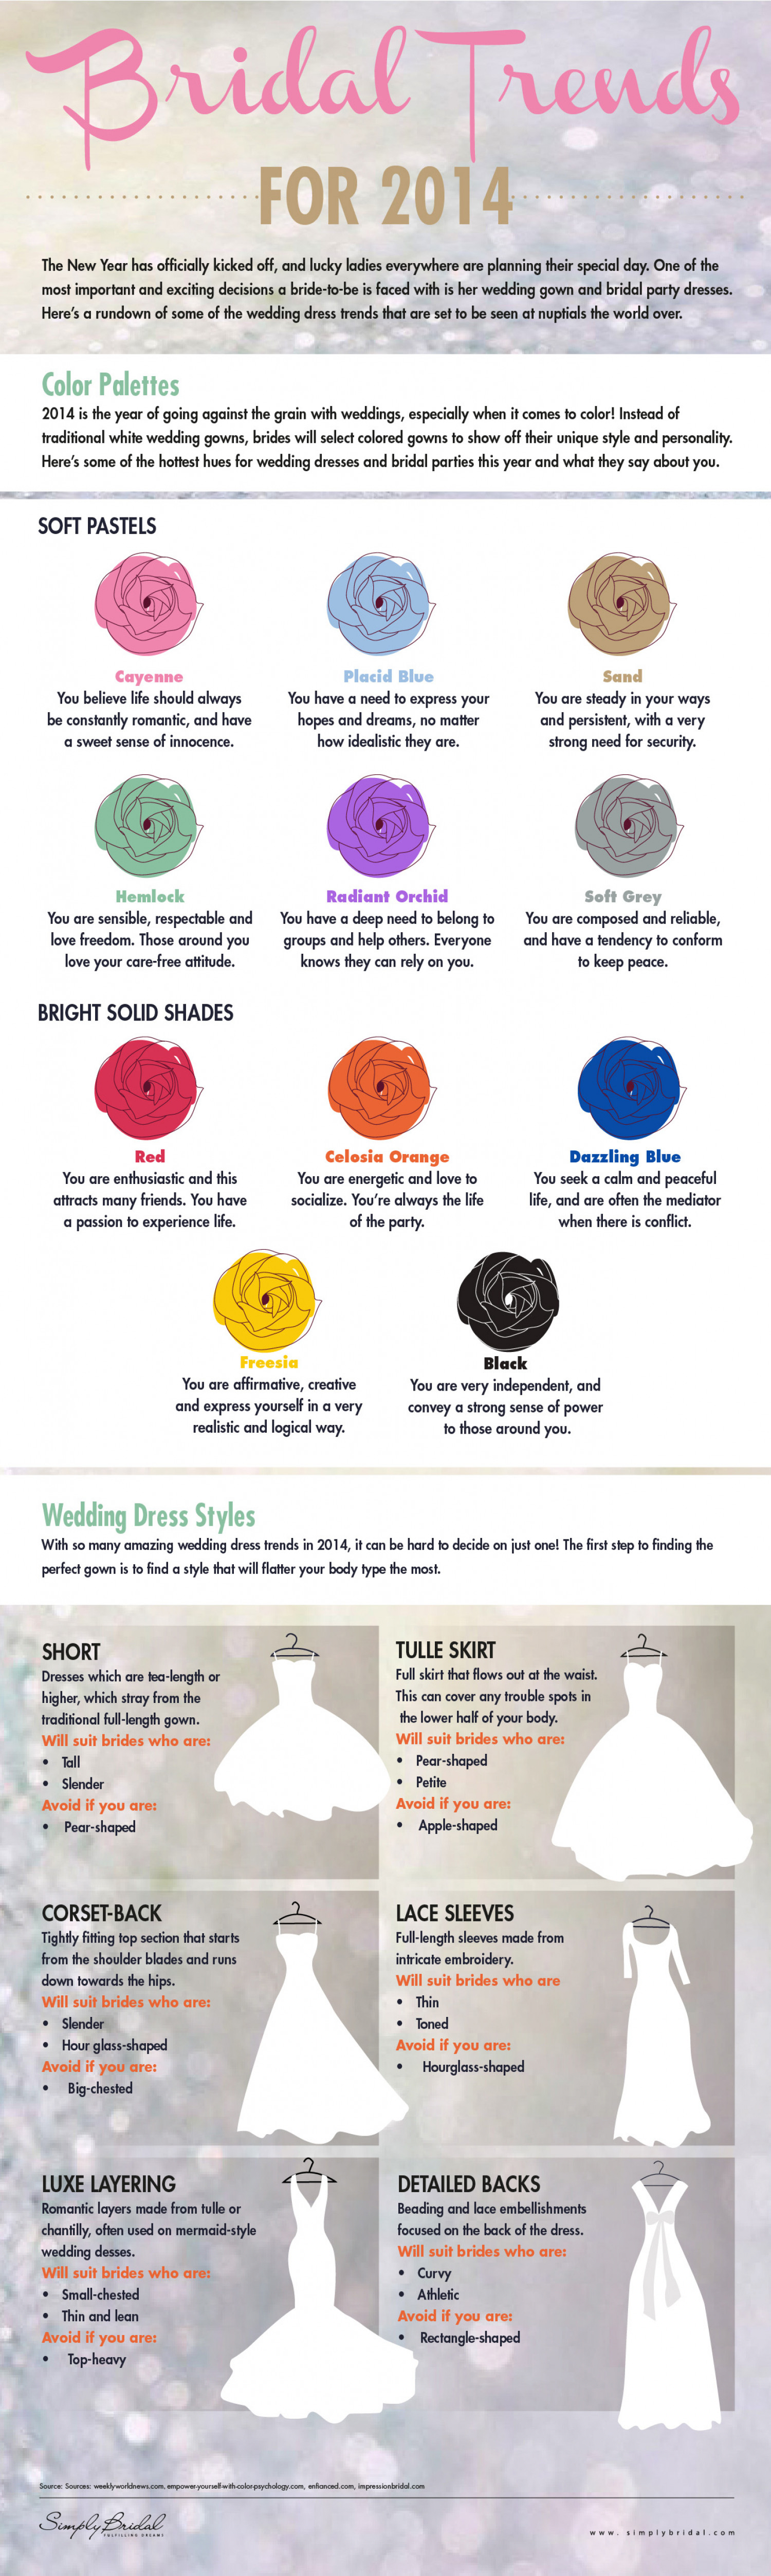 2014 Bridal Trends Infographic